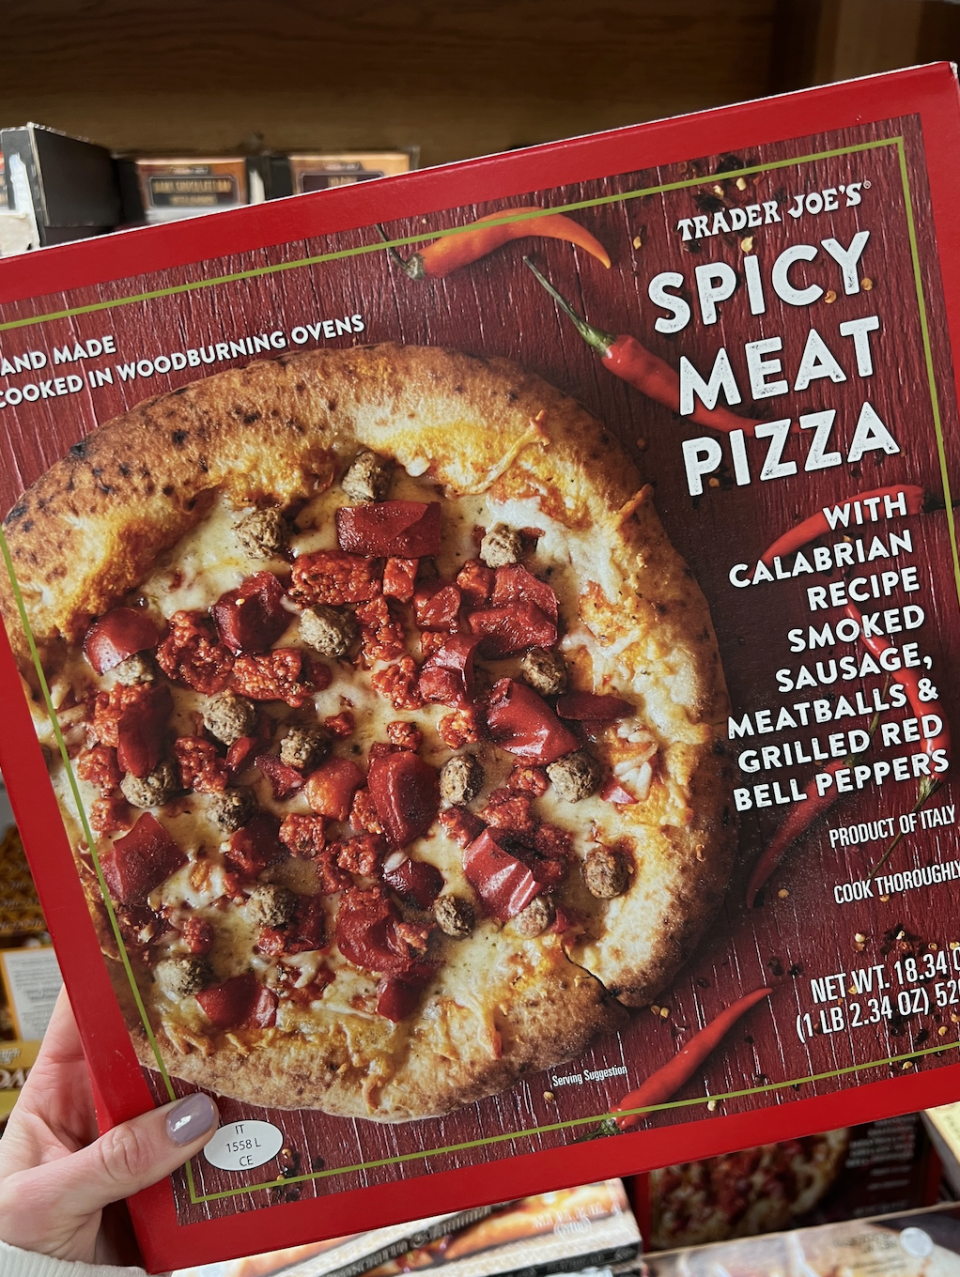 Person holding a Trader Joe's Spicy Meat Pizza box showing pizza with Calabrian chili sauce, smoked sausage, meatballs, and red bell peppers